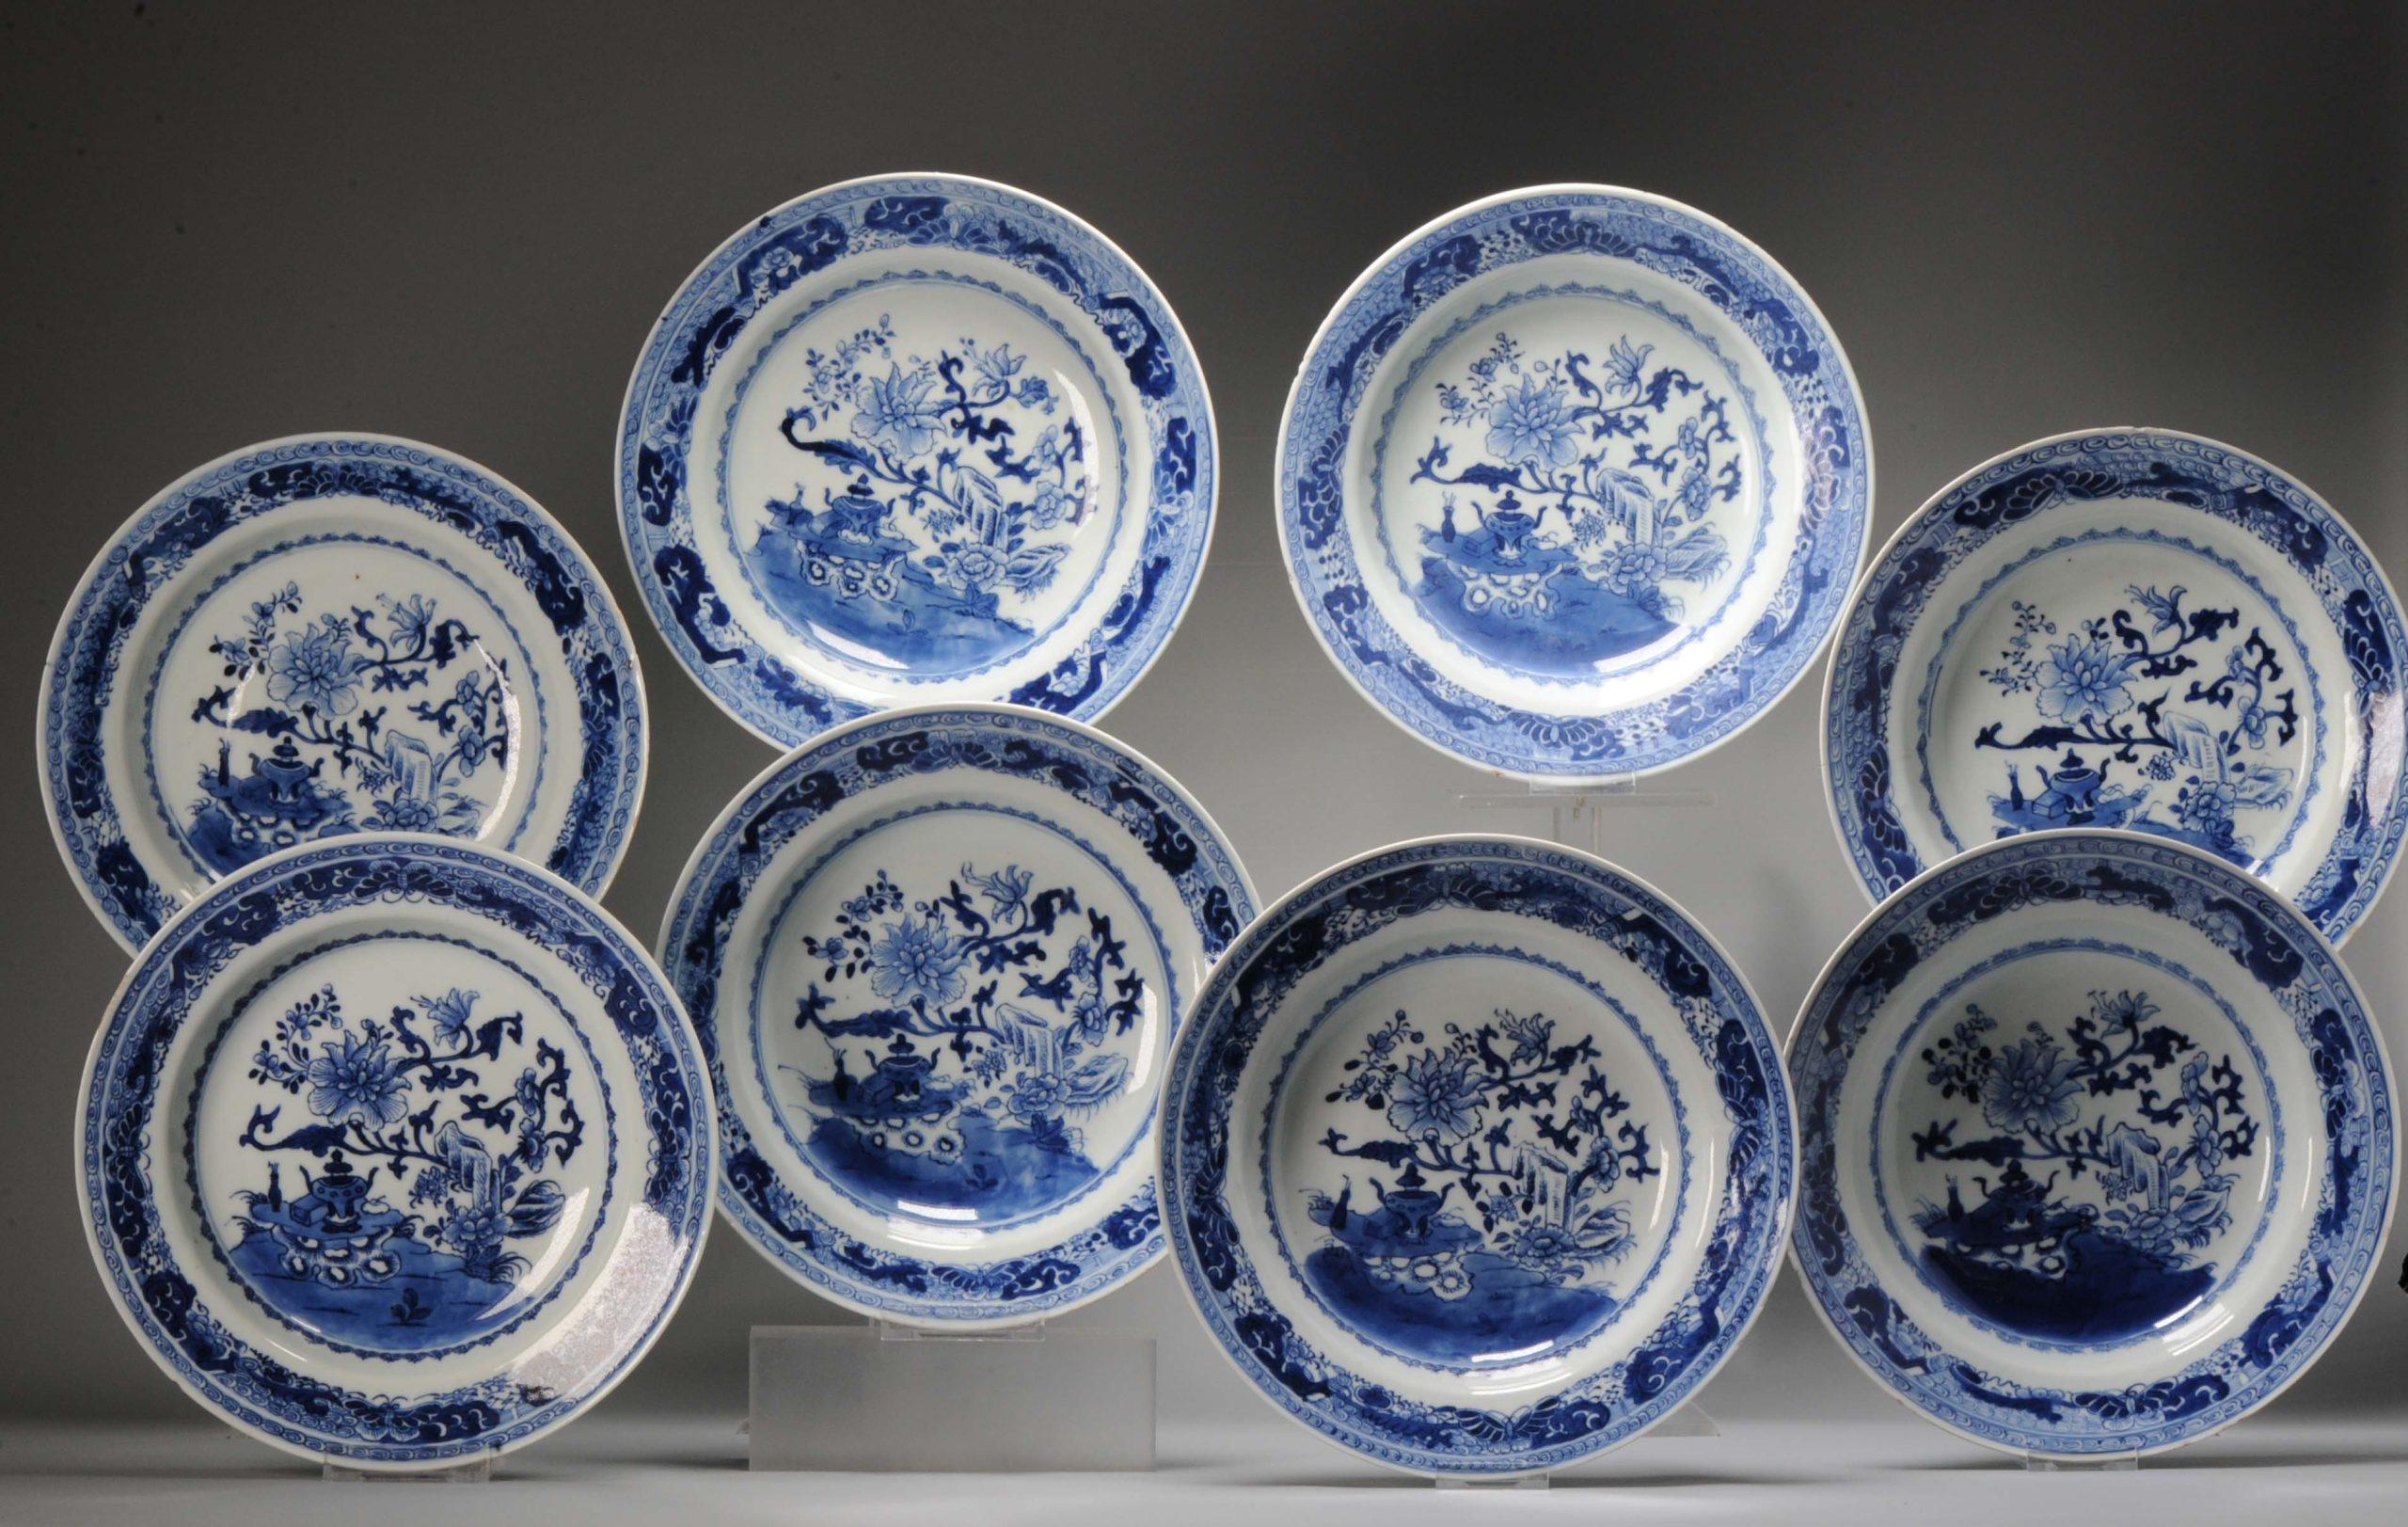 A very nicely decorated SET of 8 deep dishes in Blue and white with a lovely and high quality garden scene with flowers, rocks and a table rock with an incense burner, books and a vase. The border with flowers, scrolls, geometric design and